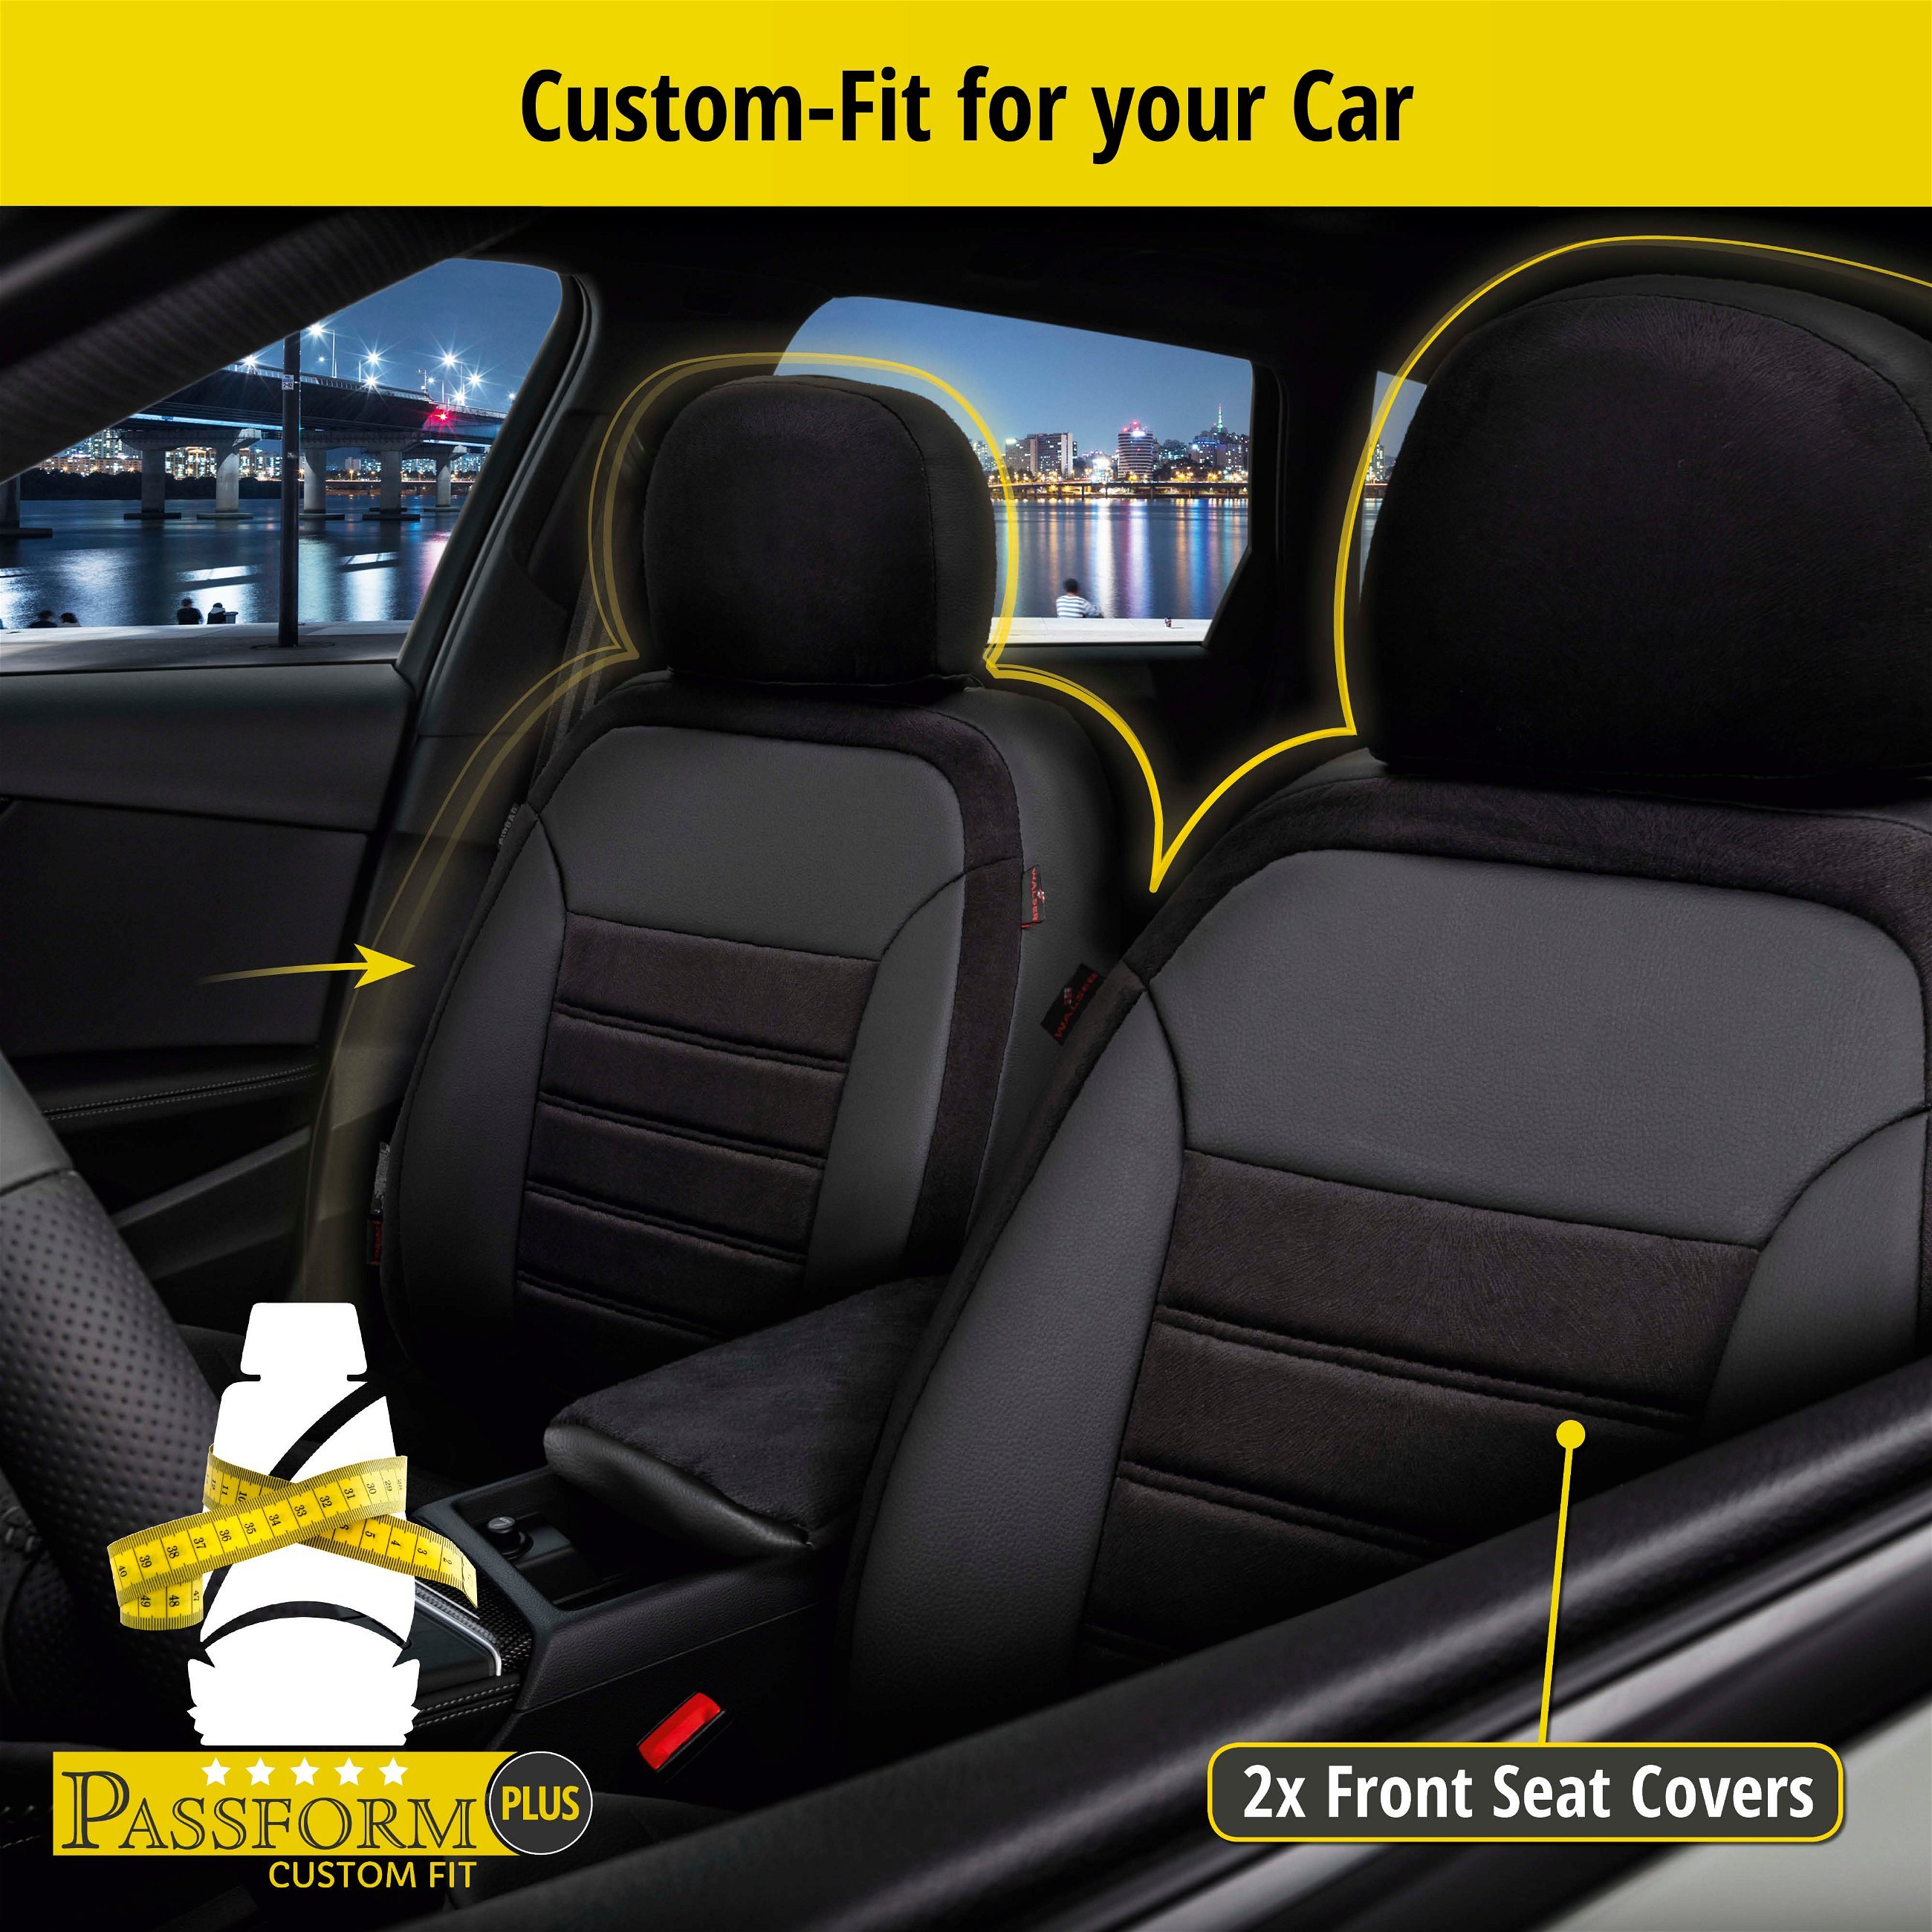 Seat Cover Bari for Mercedes-Benz B-Class W246,W242 10/2011-12/2018, 2 seat covers for normal seats